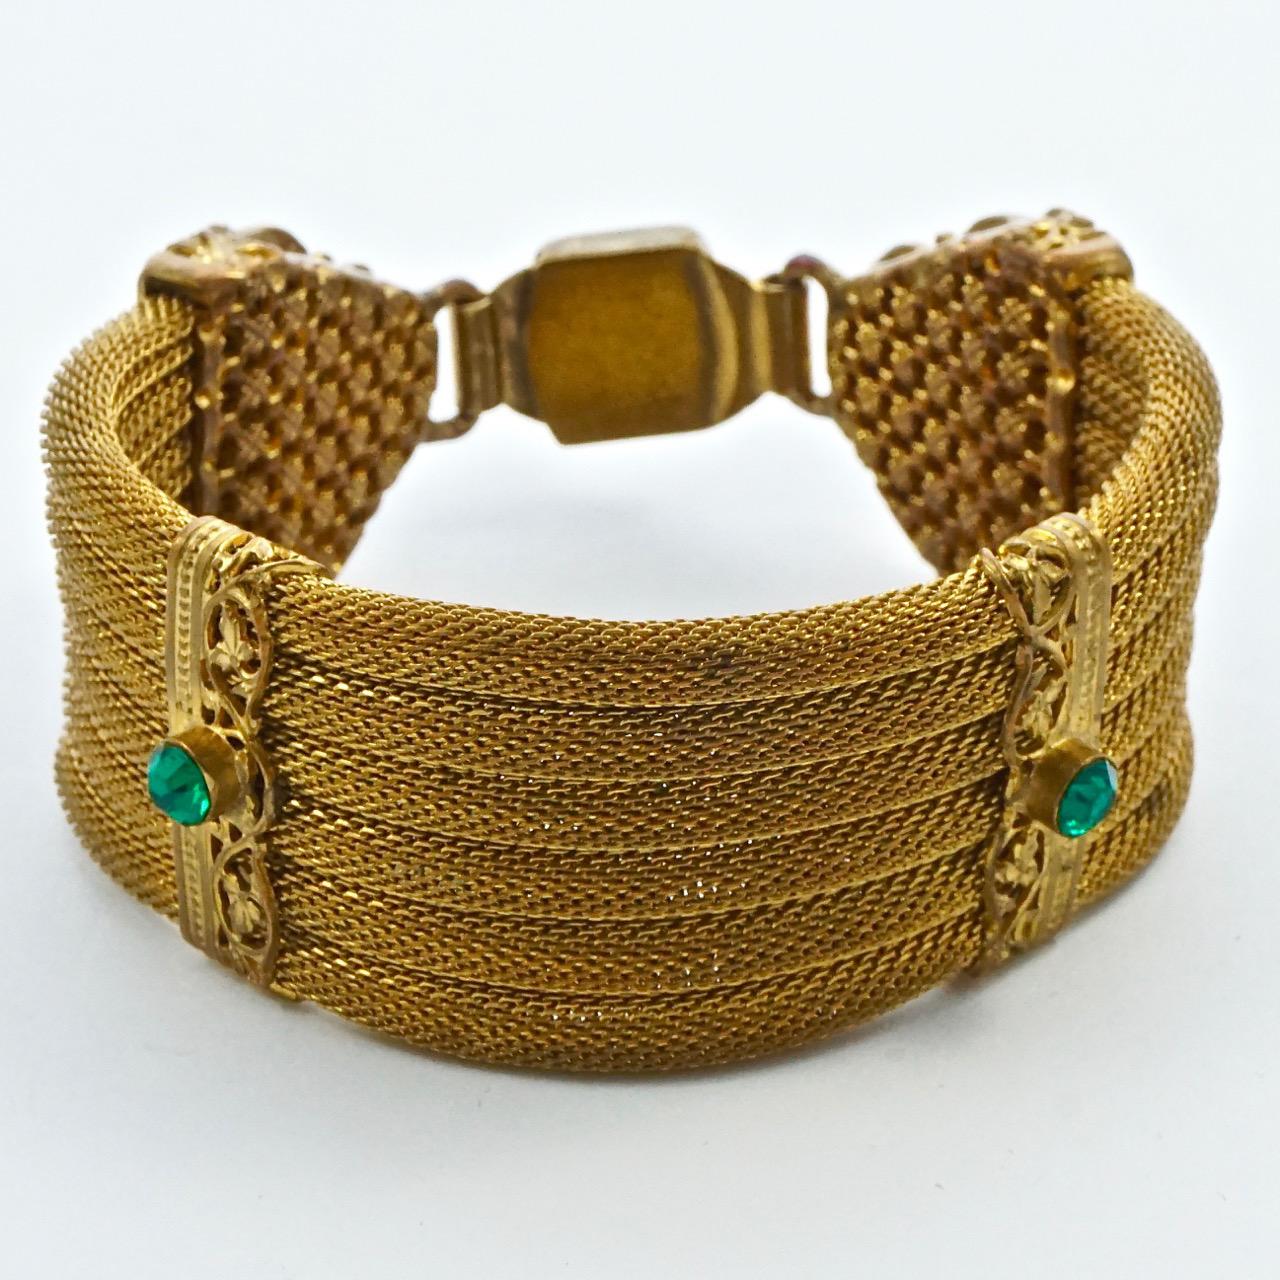 Art Deco gold plated mesh bracelet, featuring green rhinestone and green cabochon jewels, and ornate metalwork. It is probably Czech in origin. Measuring length 17.8cm / 7 inches by width 2.6cm / 1 inch. There is wear to the gold plating.

This very